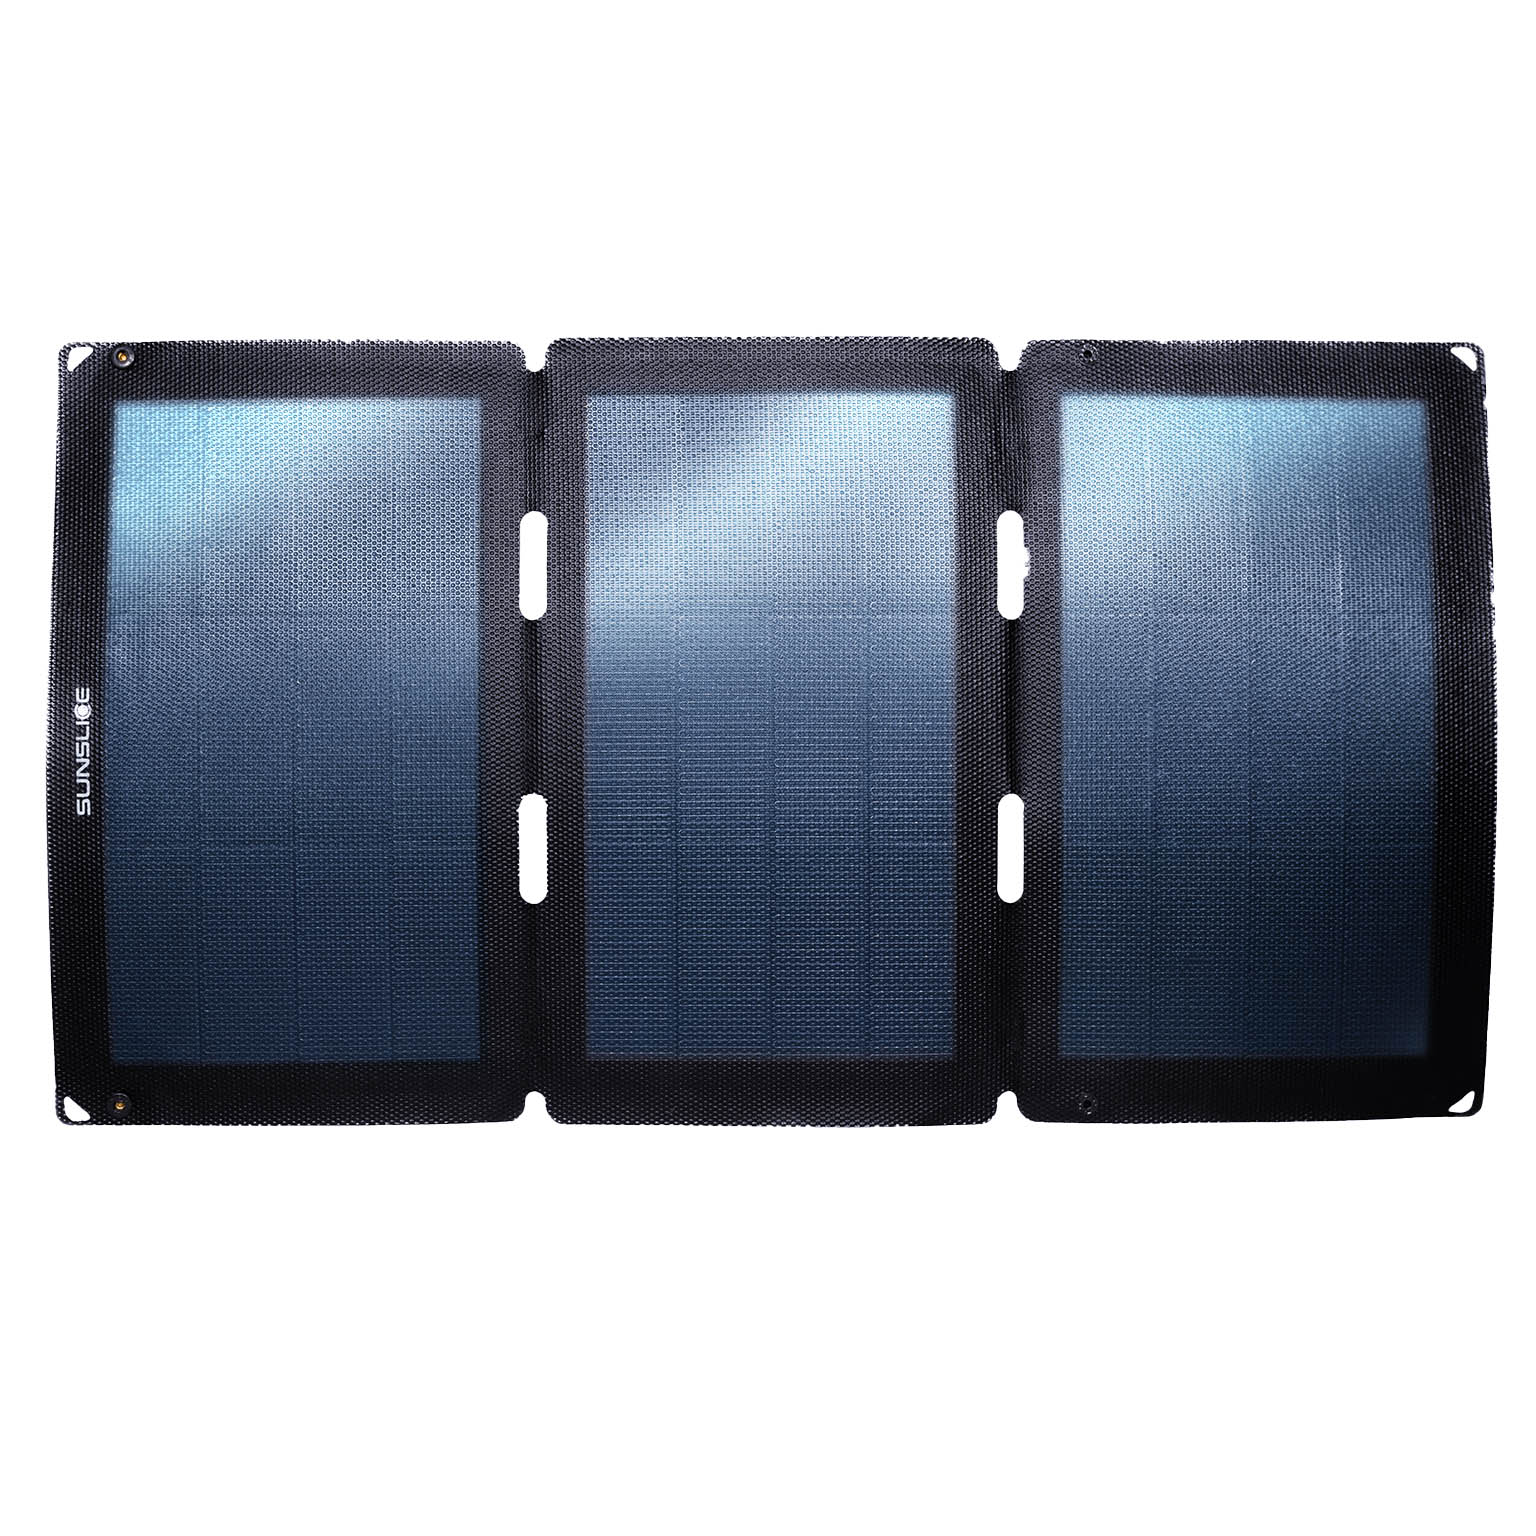 powerful solar charger fusion flex24 on white background